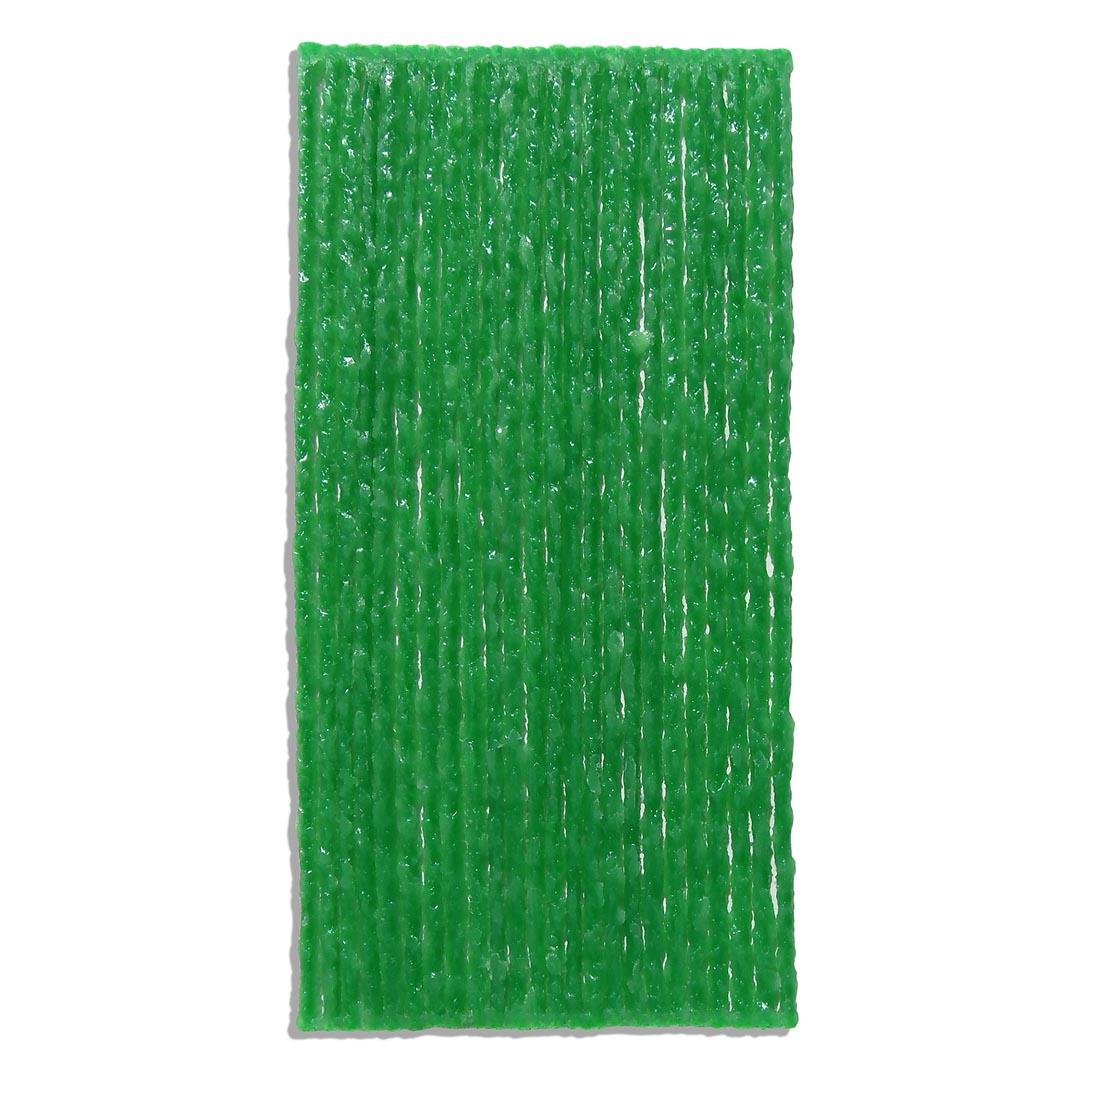 yarn pieces coated with light green wax